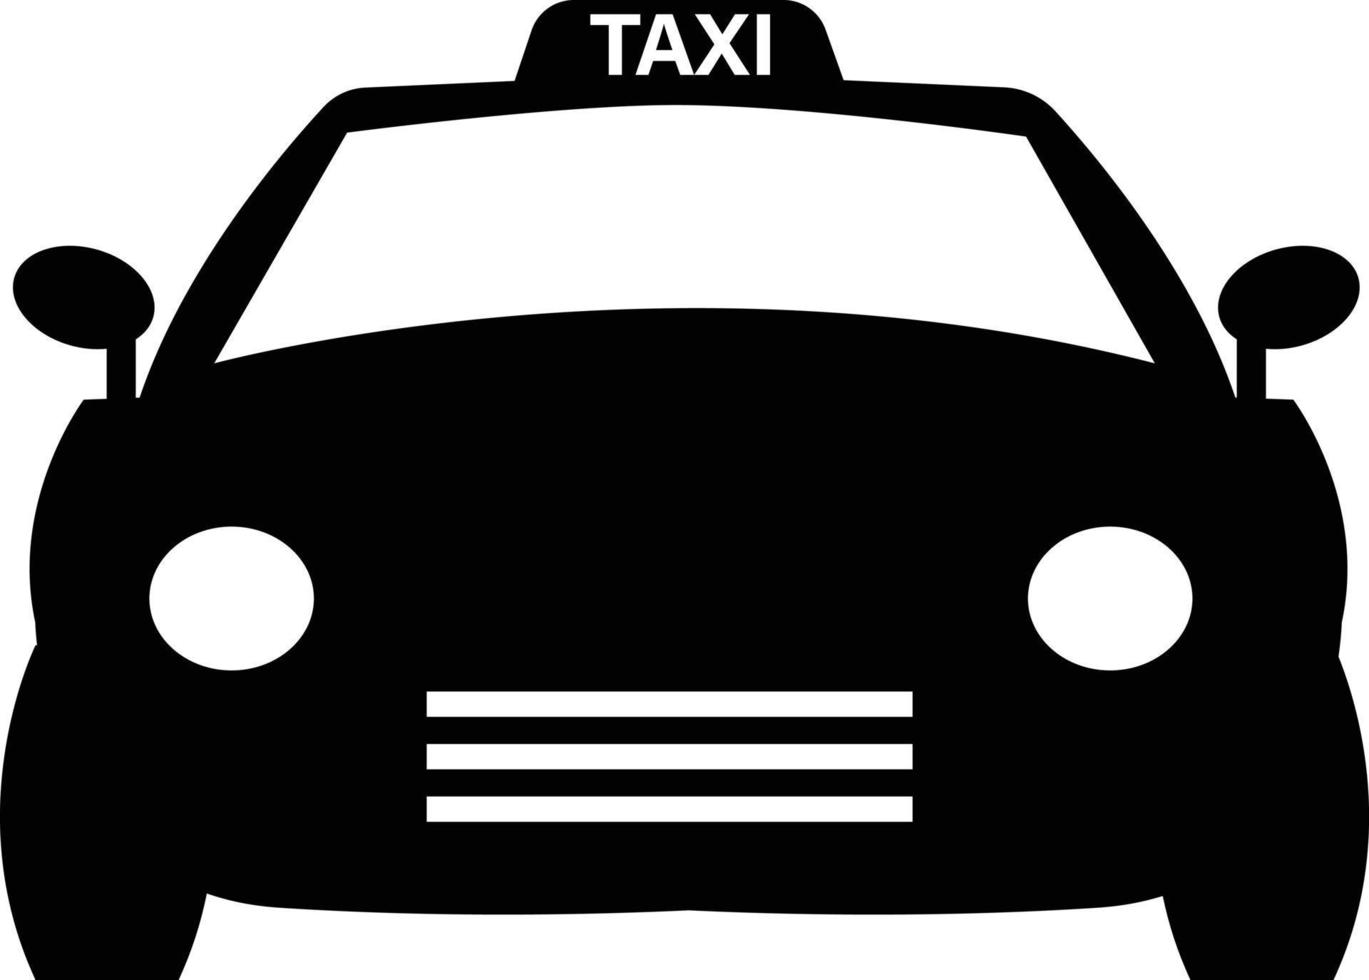 Taxi icon on white background. Taxi sign. flat style. vector